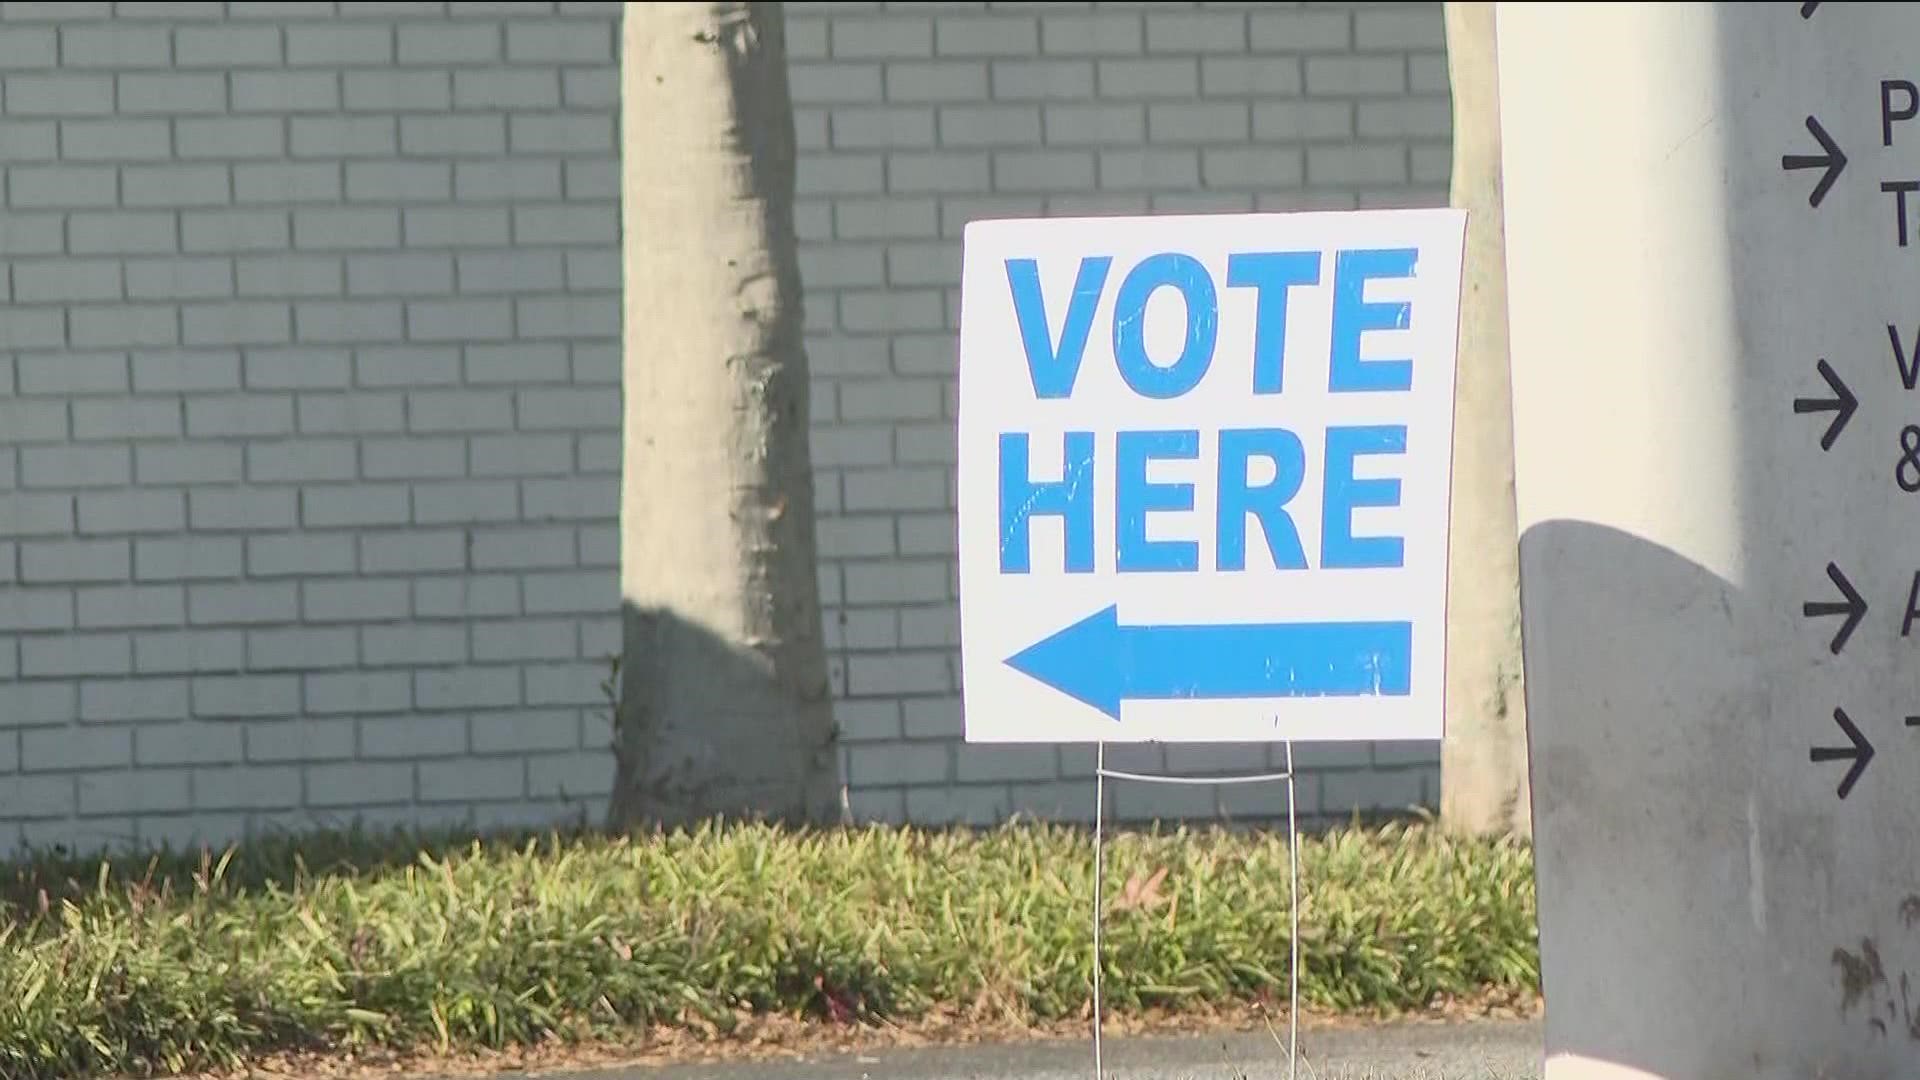 Early voting is ending in the historic first election for the city of Mableton.